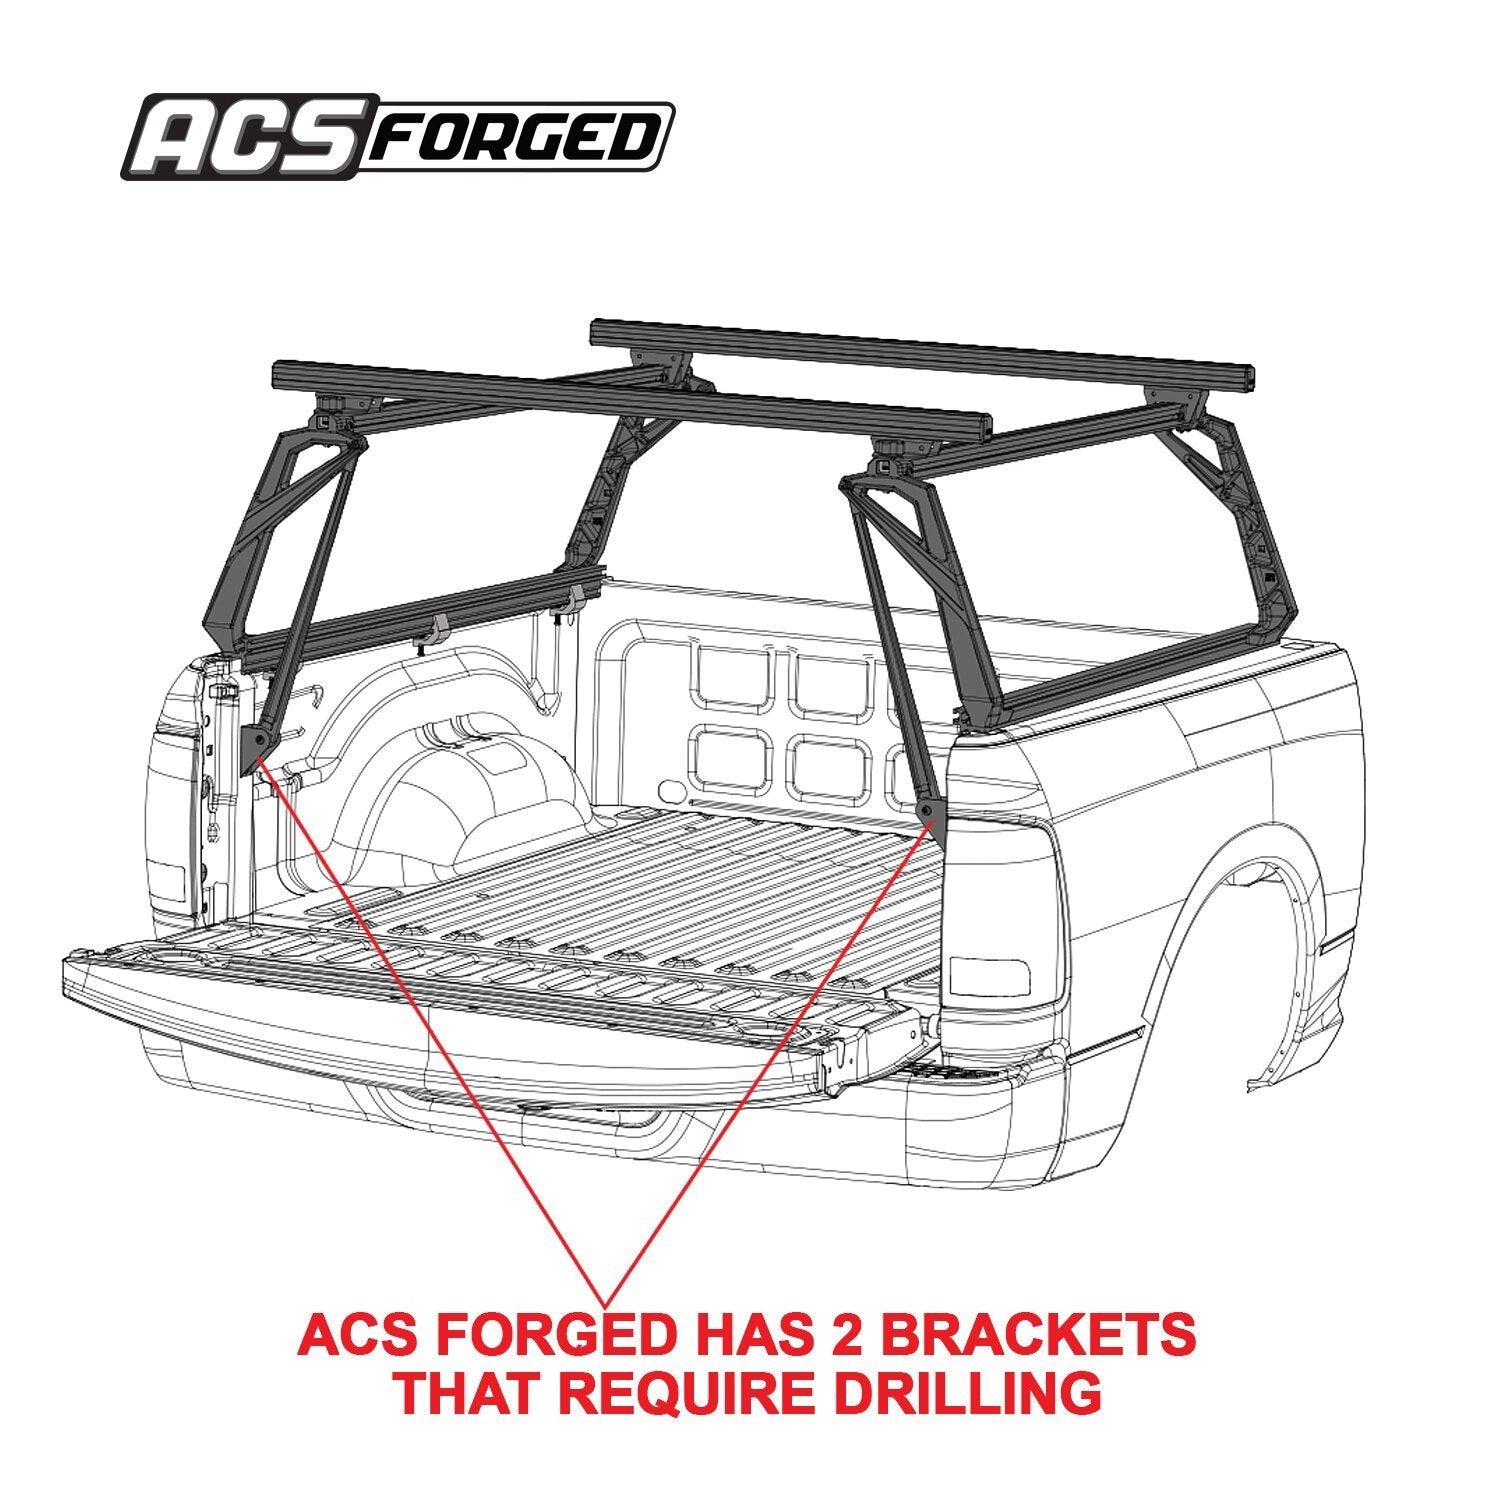 '16-20 Toyota Tacoma-ACS Forged Bed Accessories Leitner Designs design